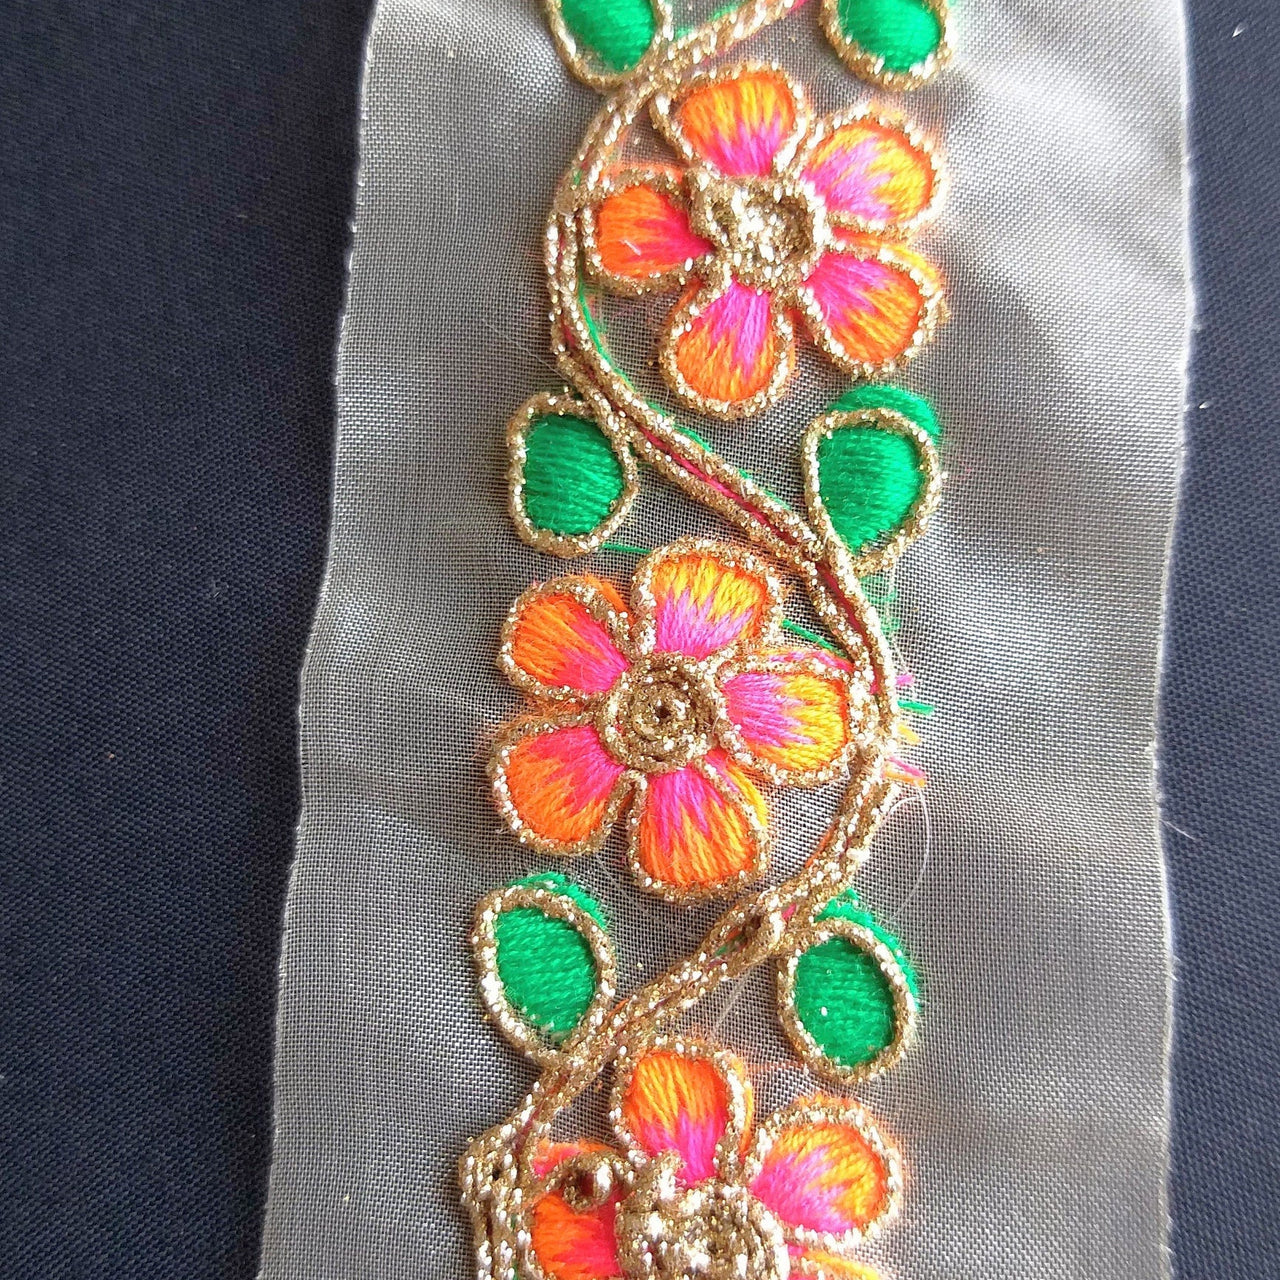 Gold Sheer Tissue Fabric Trim With Embroidered Pink / Blue, Orange, Green & Gold Flowers